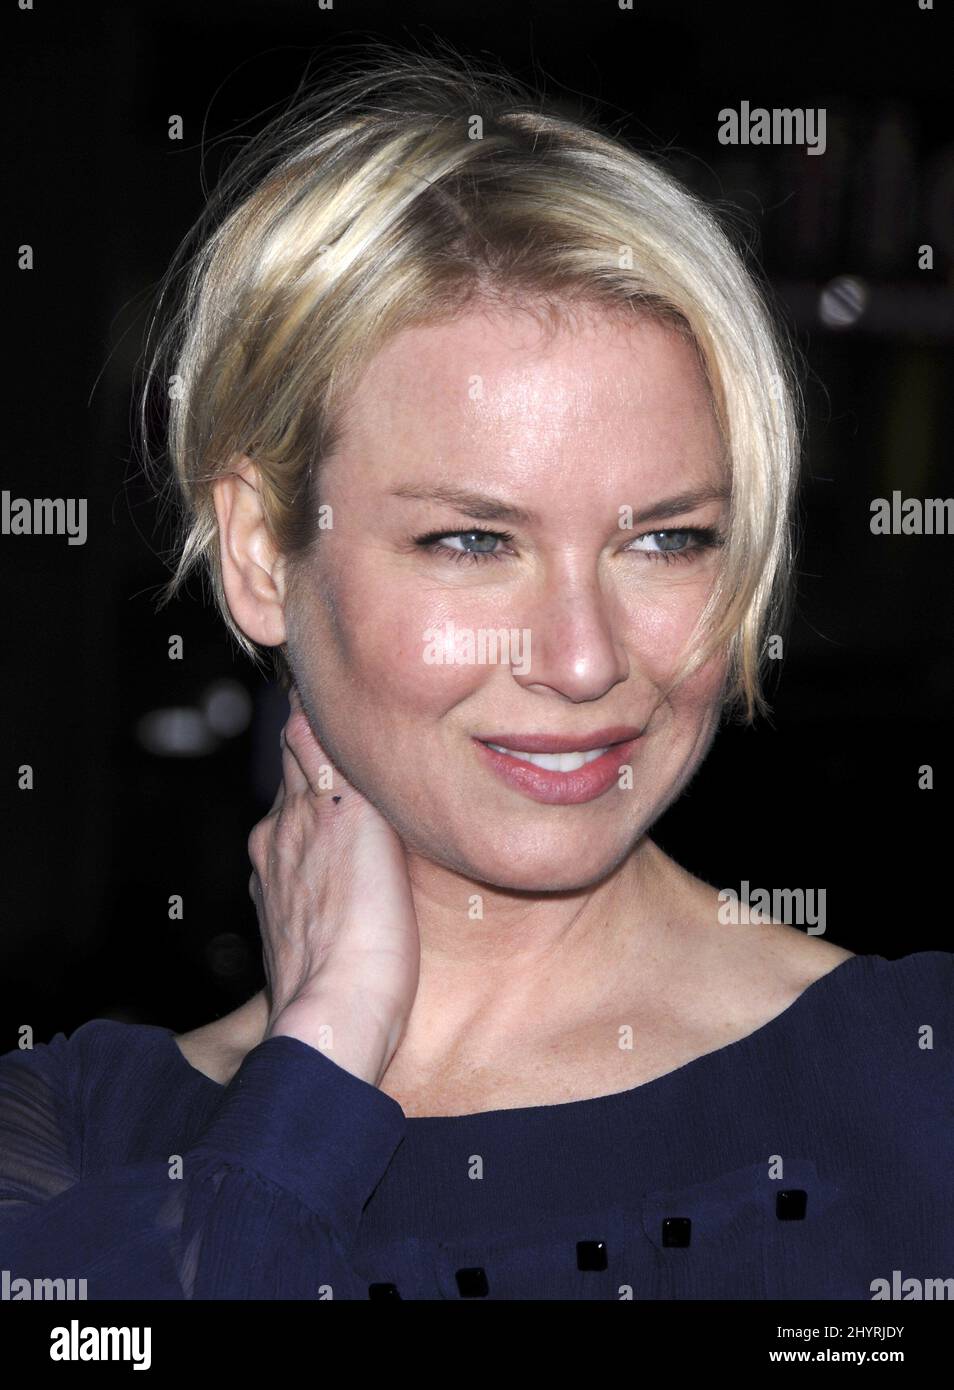 Renee Zellweger attends the Leatherheads world premiere held at Grauman's Chinese Theatre, Hollywood Stock Photo